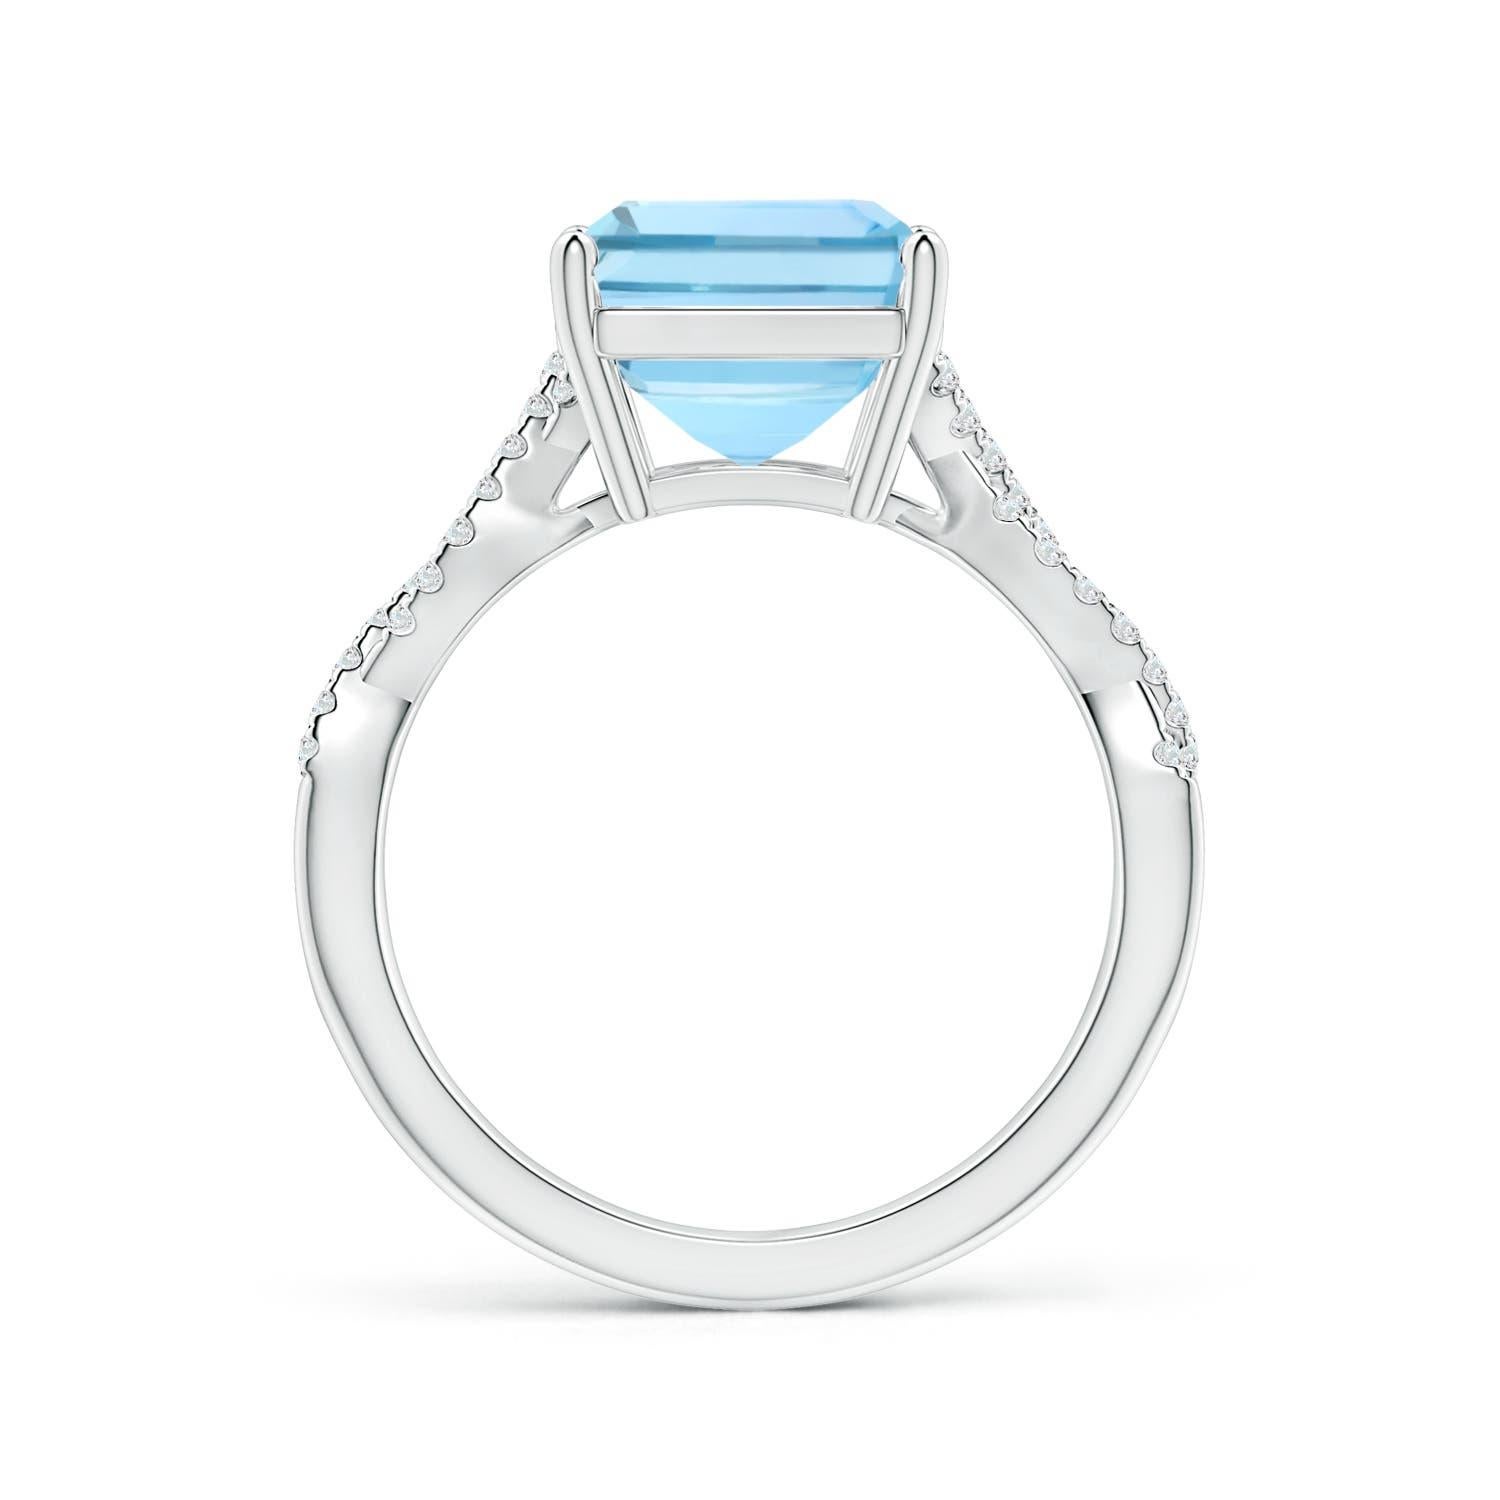 For Sale:  Angara GIA Certified Emerald-Cut Aquamarine White Gold Ring with Diamond Shank 2